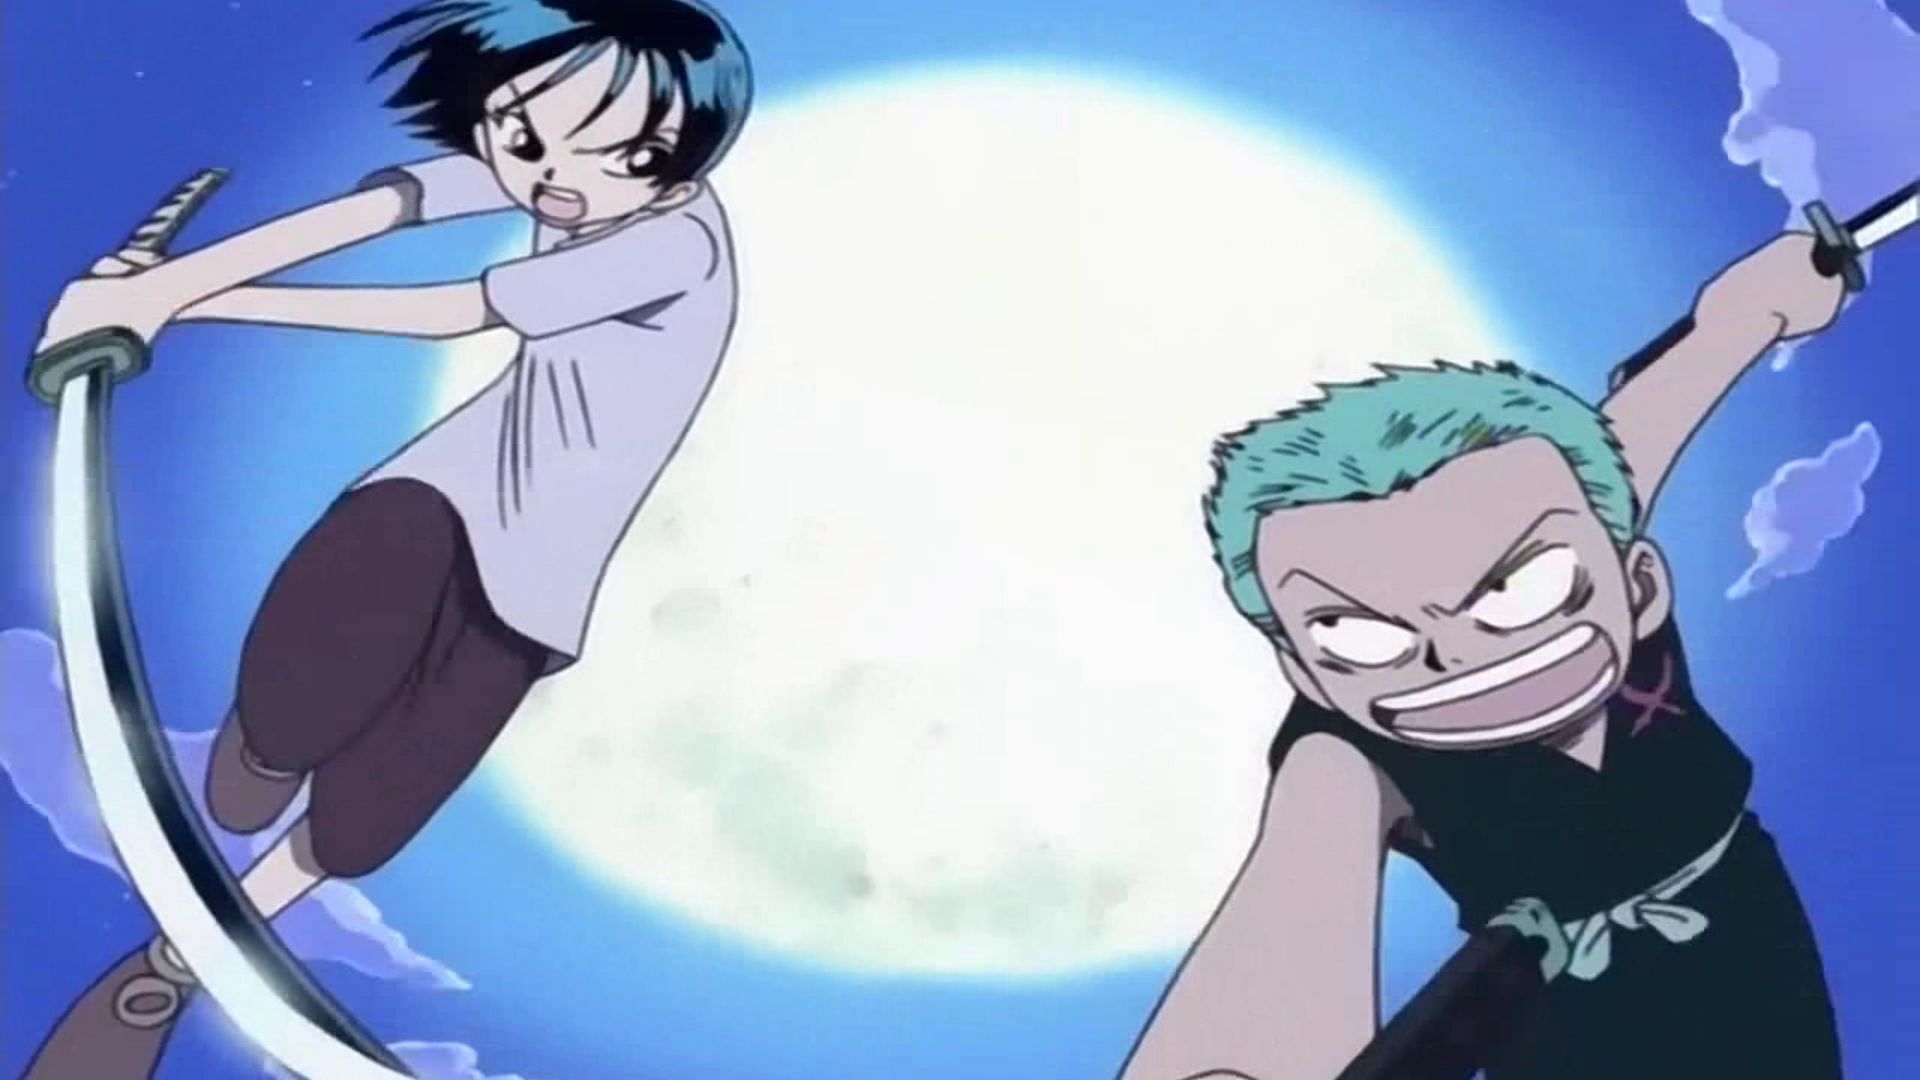 Zoro and Kuina may have had love for each other in One Piece, but it